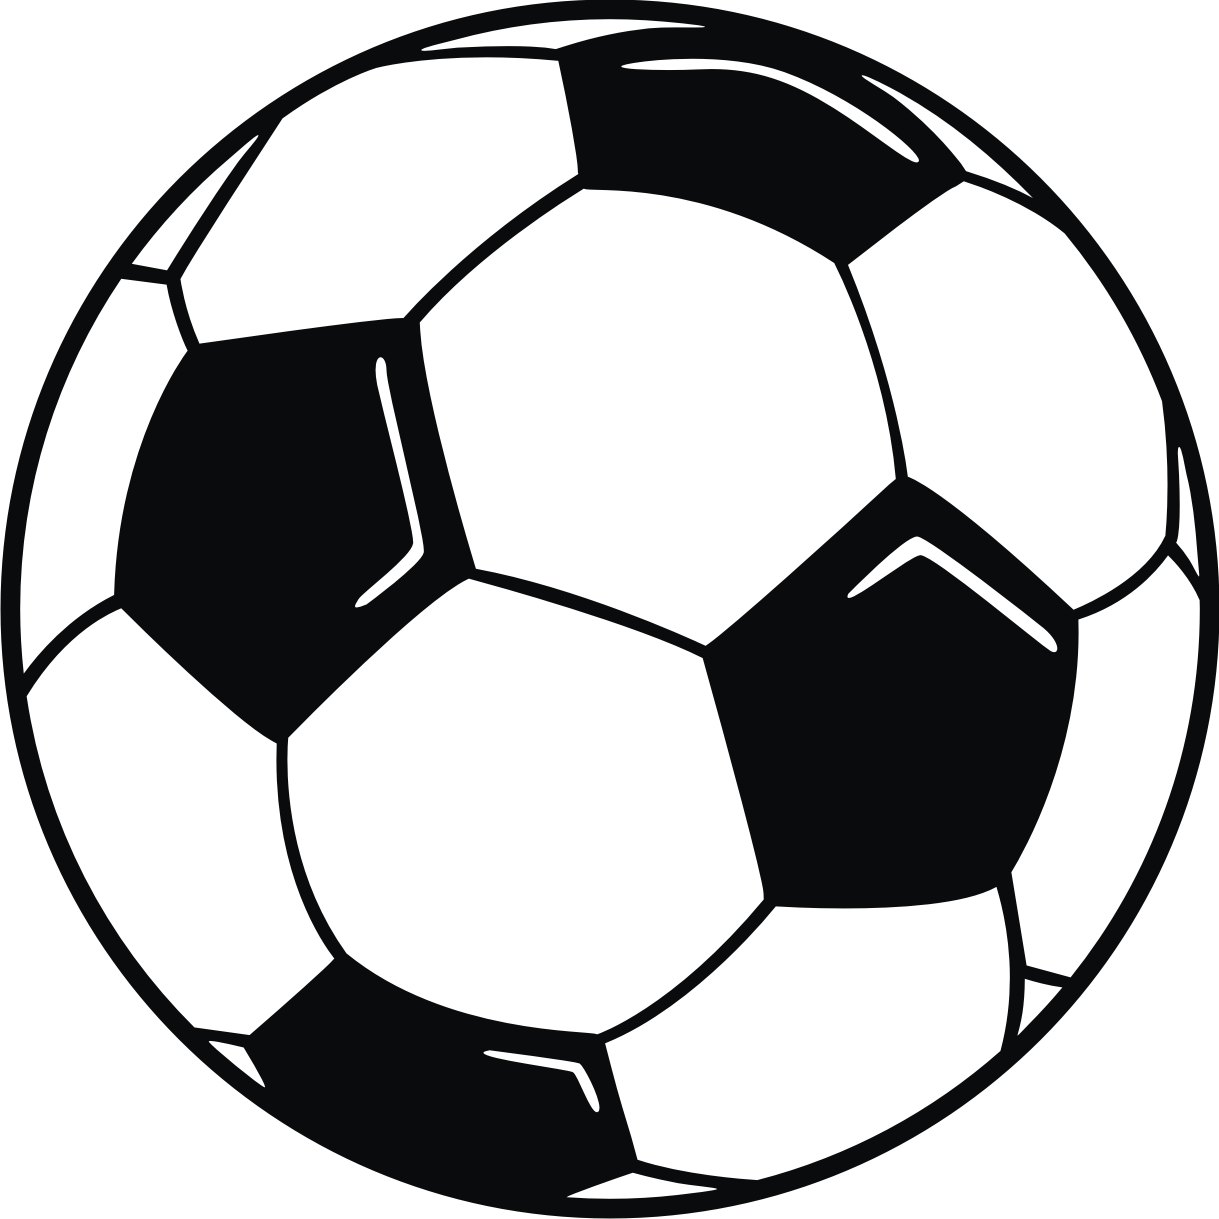 Soccer ball robyn silhouette cameo soccer soccer clipart - Clipartix